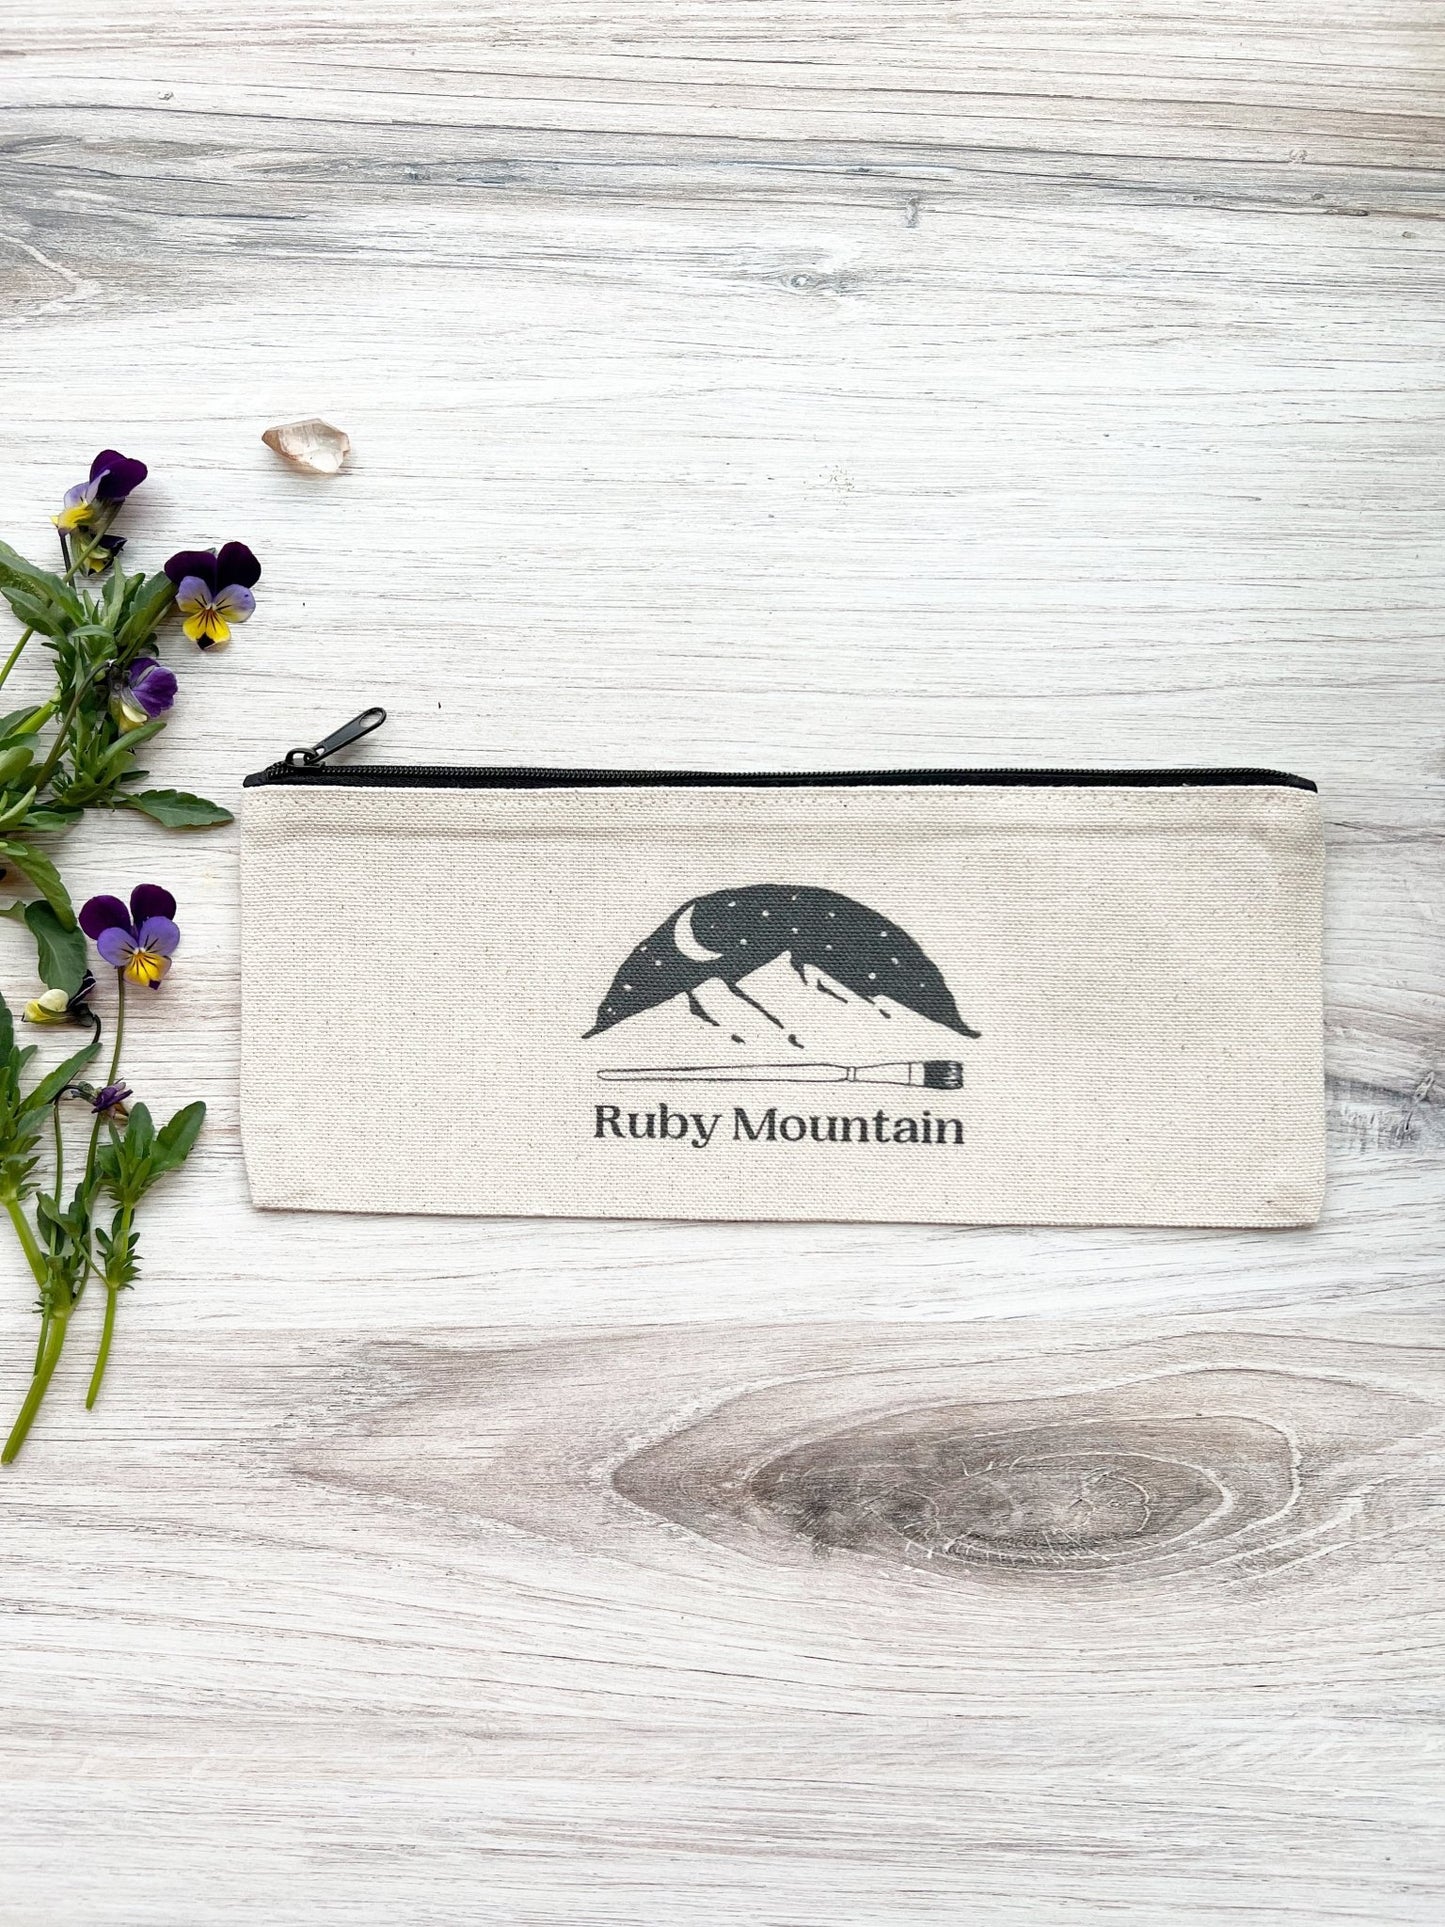 Ruby Mountain Pencil Pouch with pencils